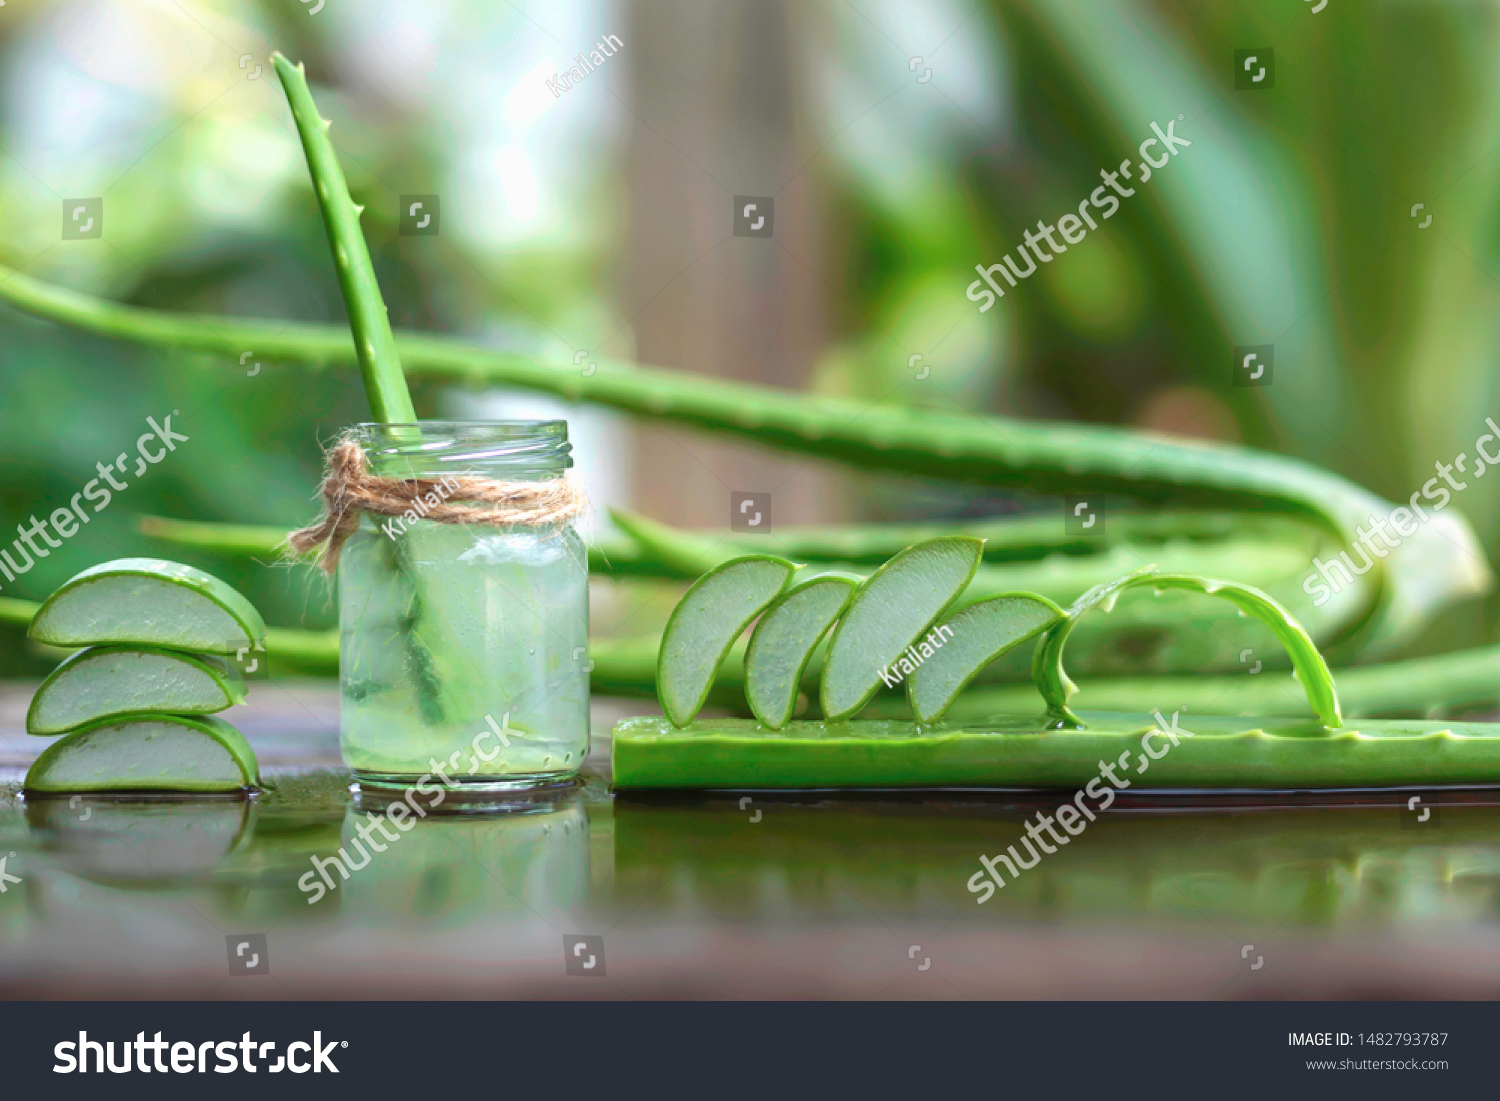 Aloe vera leaves and a glass of water laid on the wooden floor #1482793787